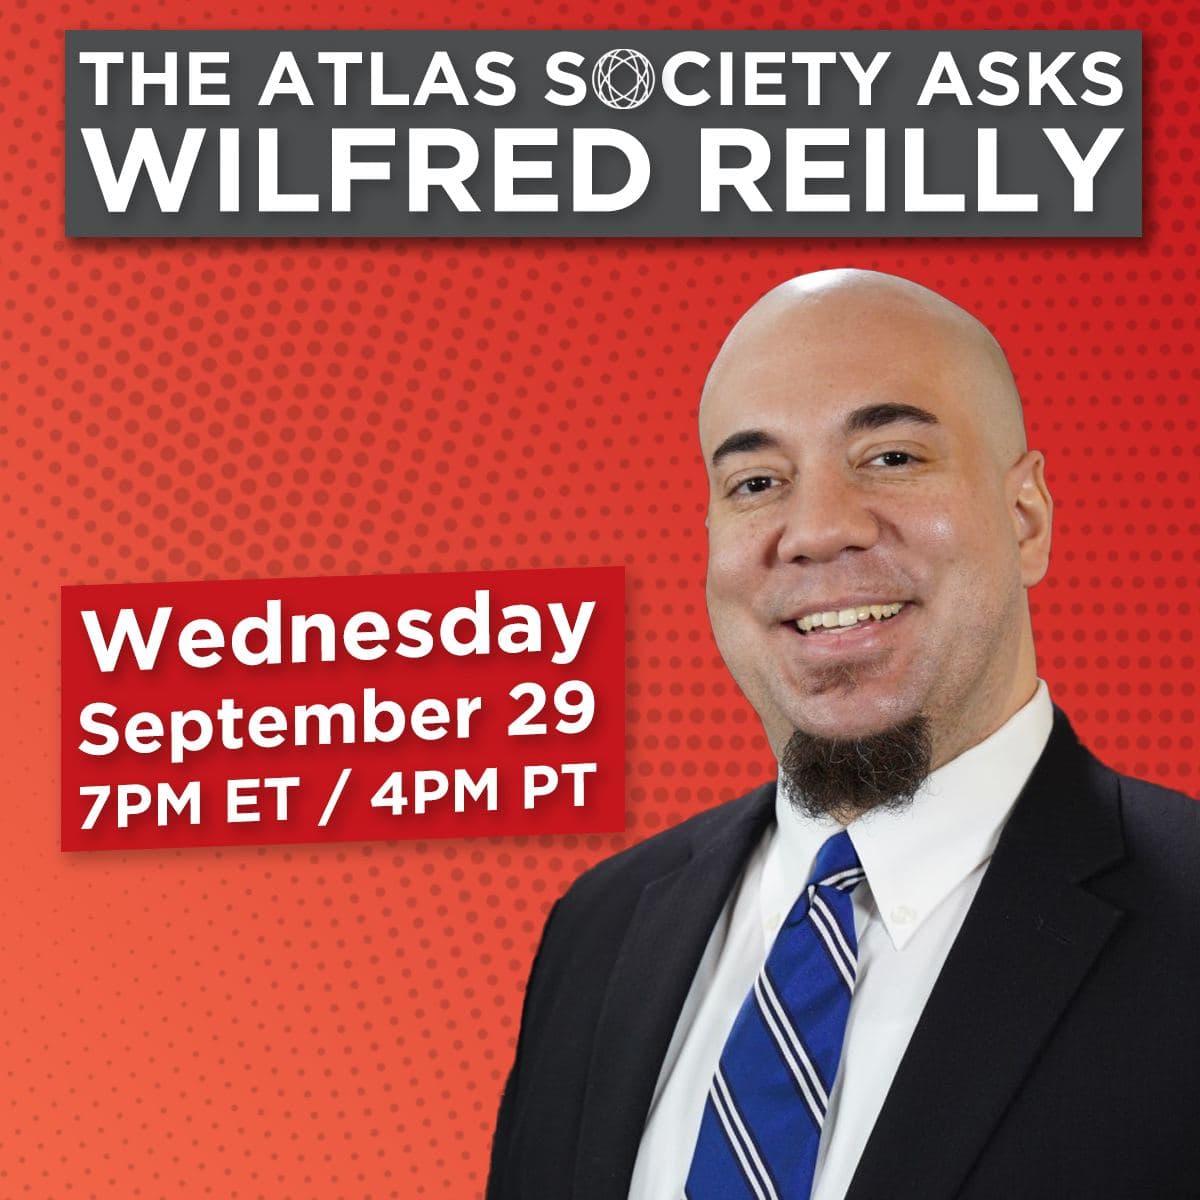 The Atlas Society Asks Wilfred Reilly